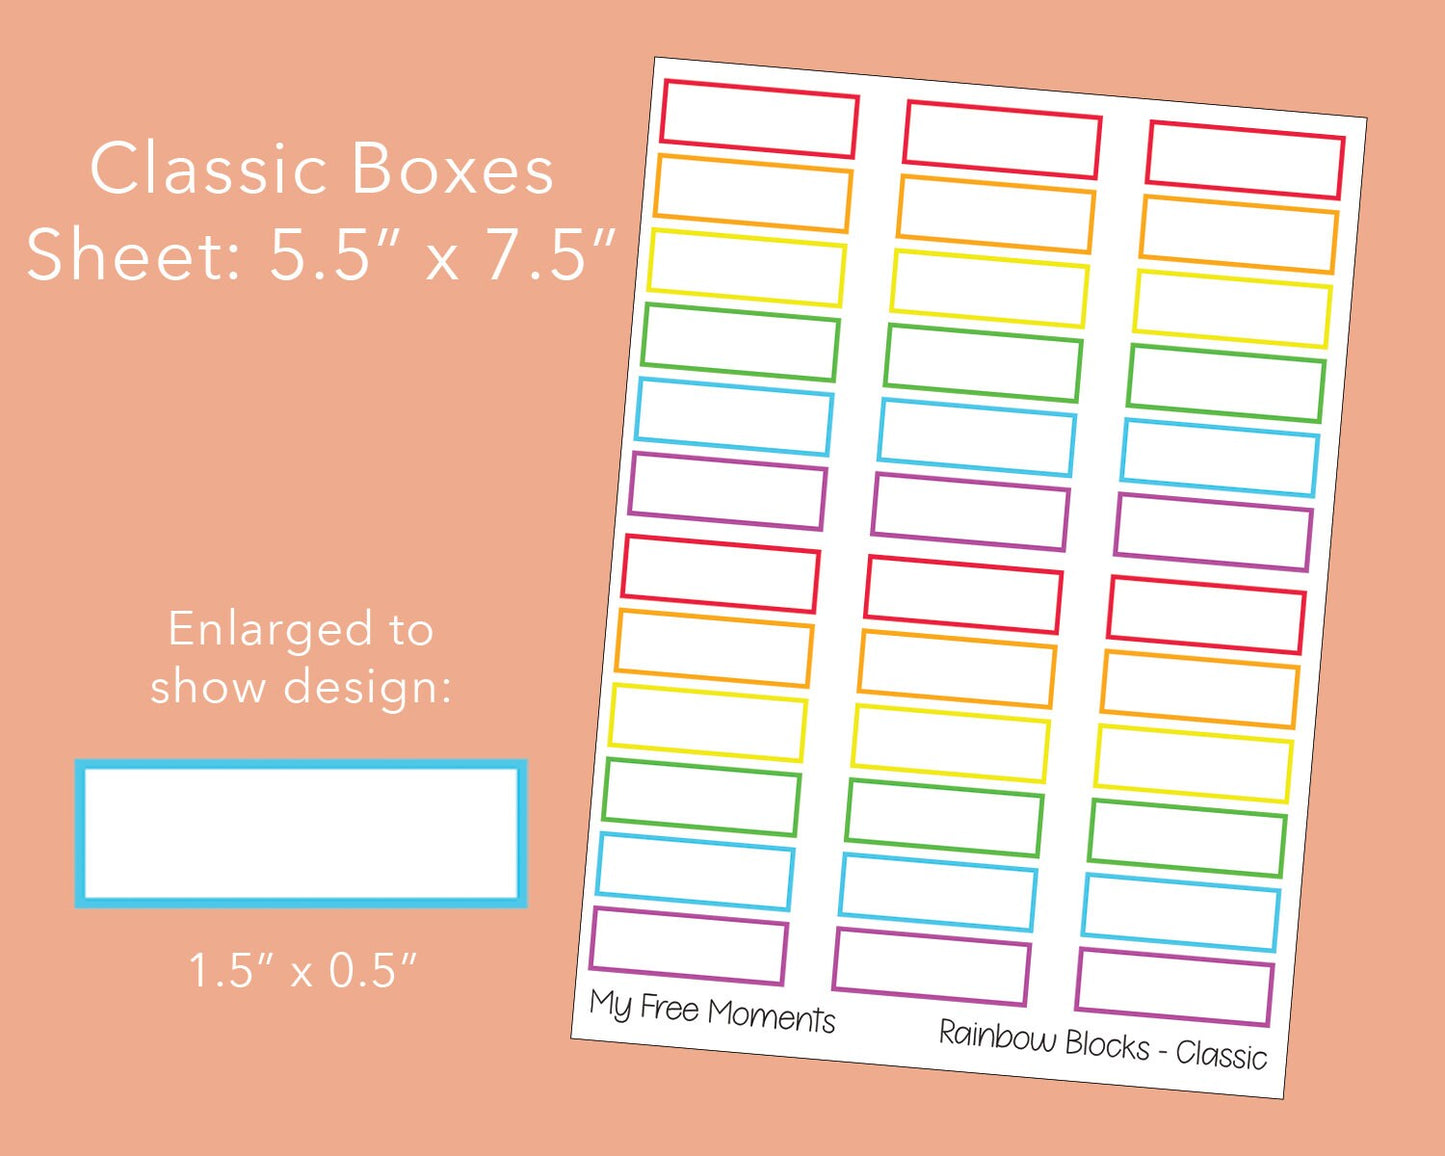 Classic Boxes 1.5" x 0.5" - Planner Sticker Sheet